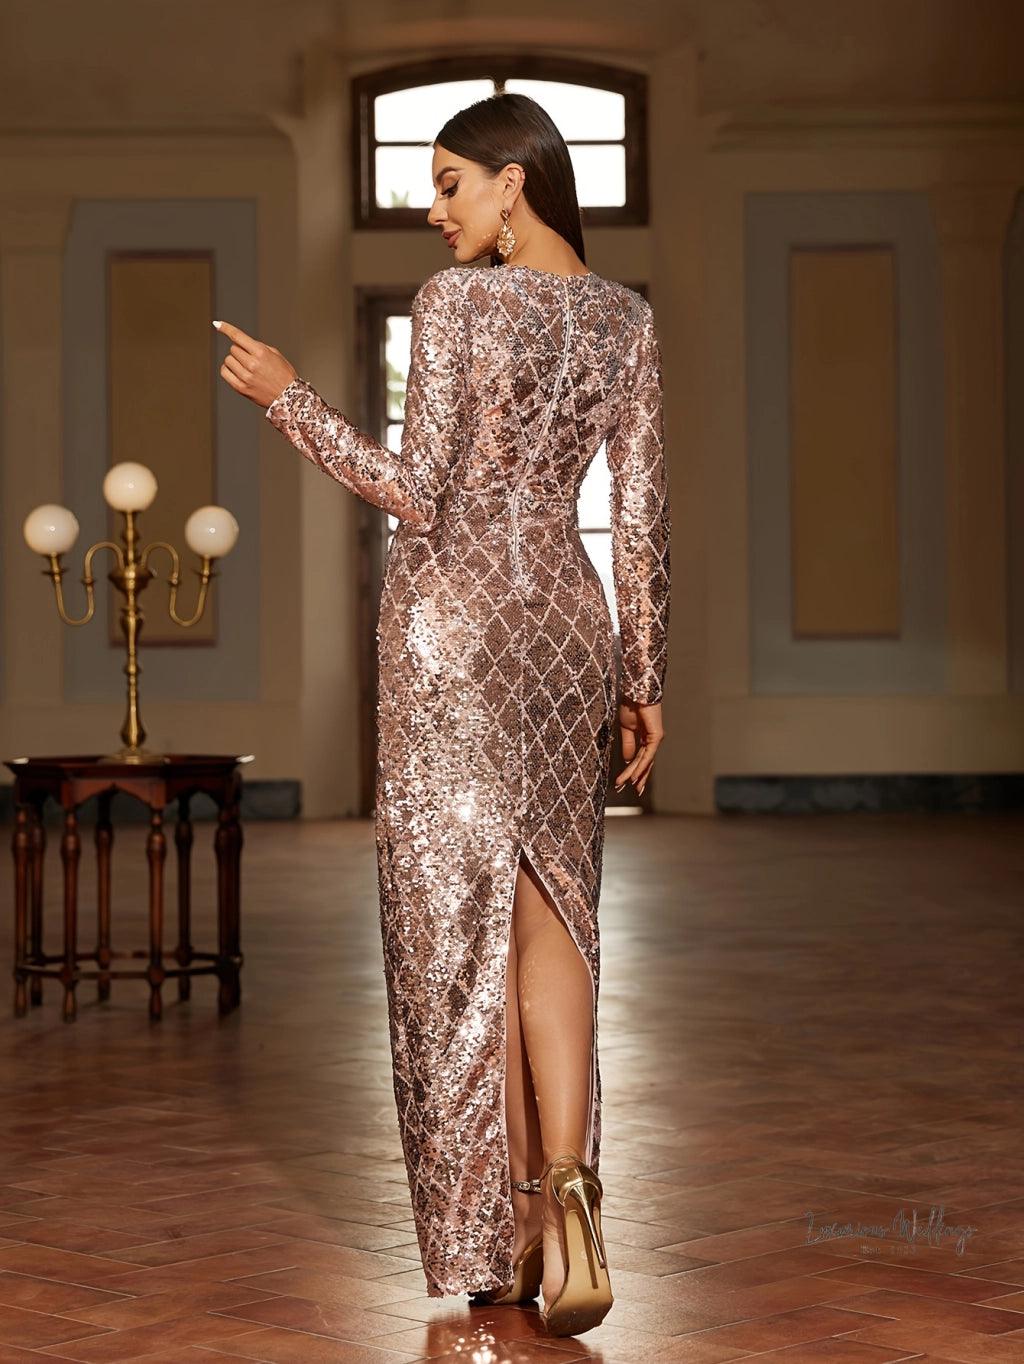 Elegant Sequined Evening Dress for Women - Long Sleeve Sheath, Perfect for Parties & Banquets - Luxurious Weddings